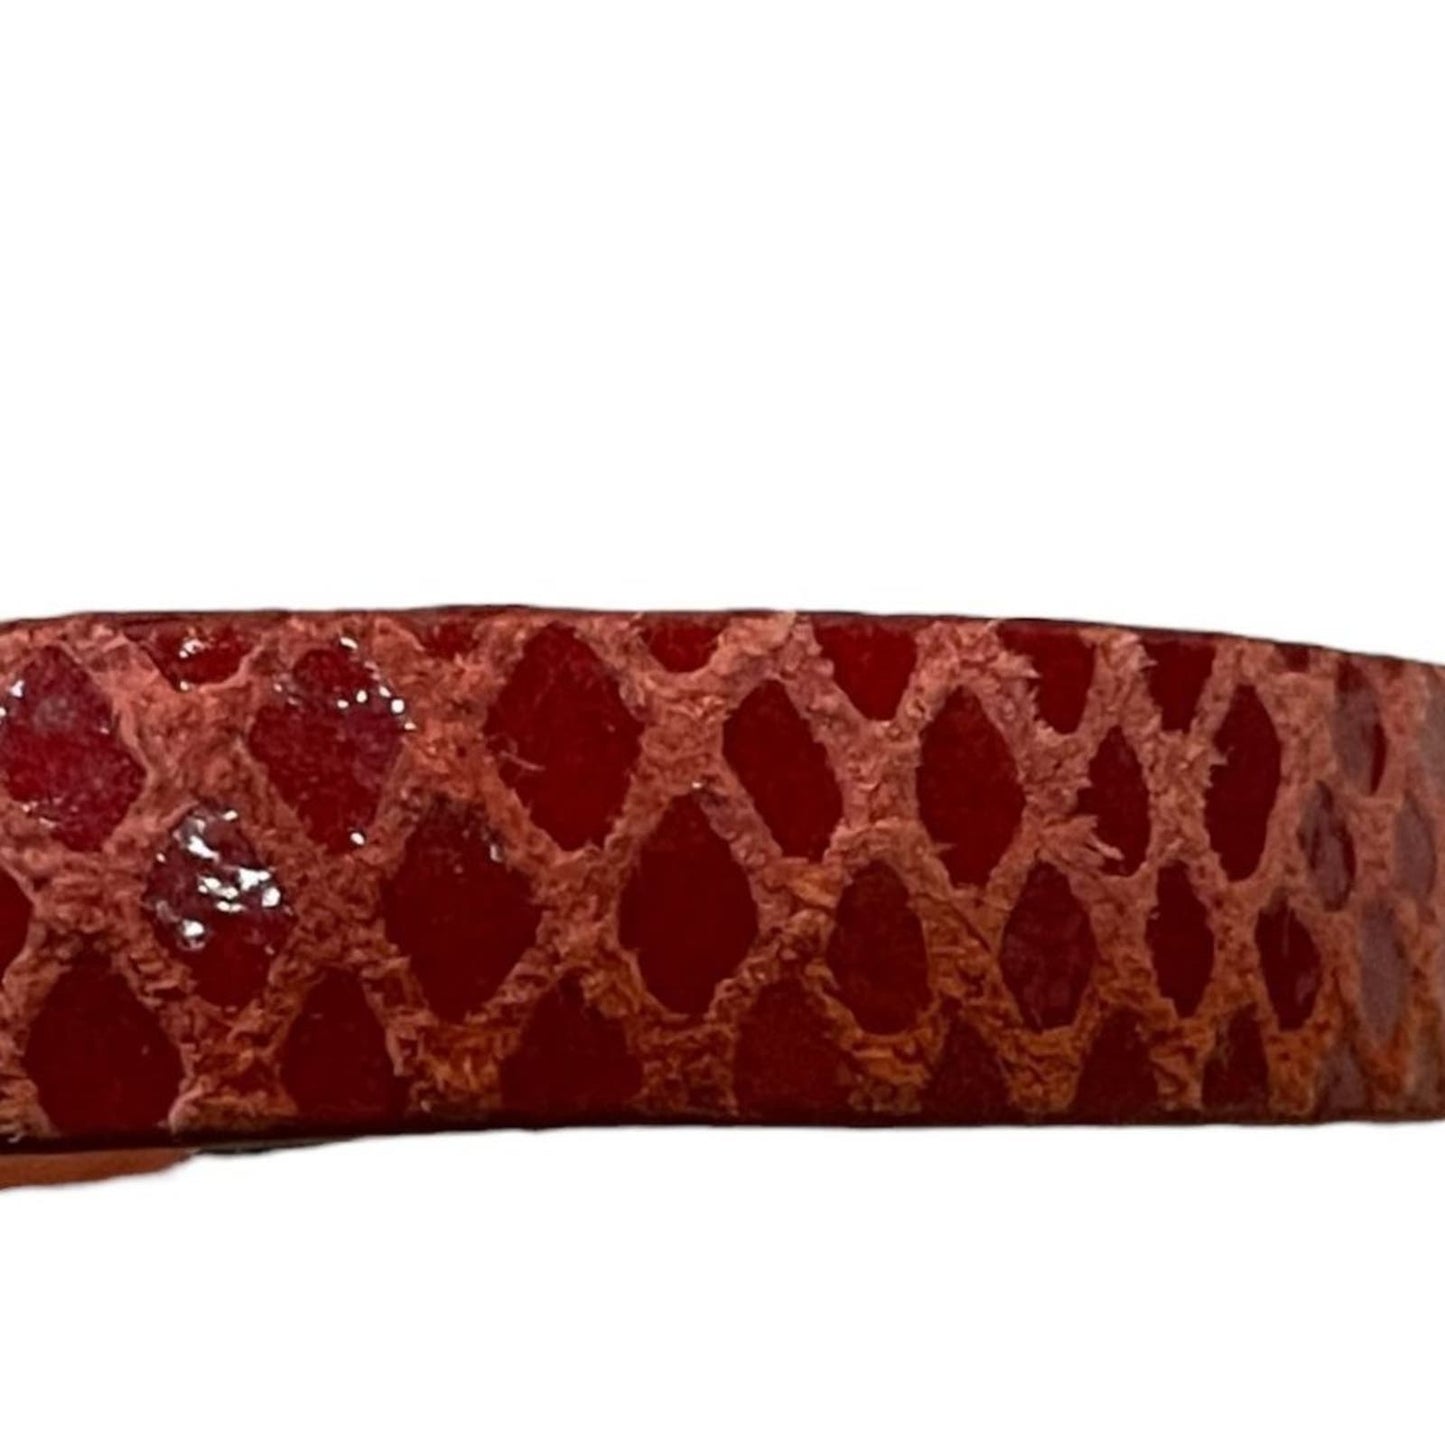 2 Fossil Bracelets- Red leather & Aqua Woven